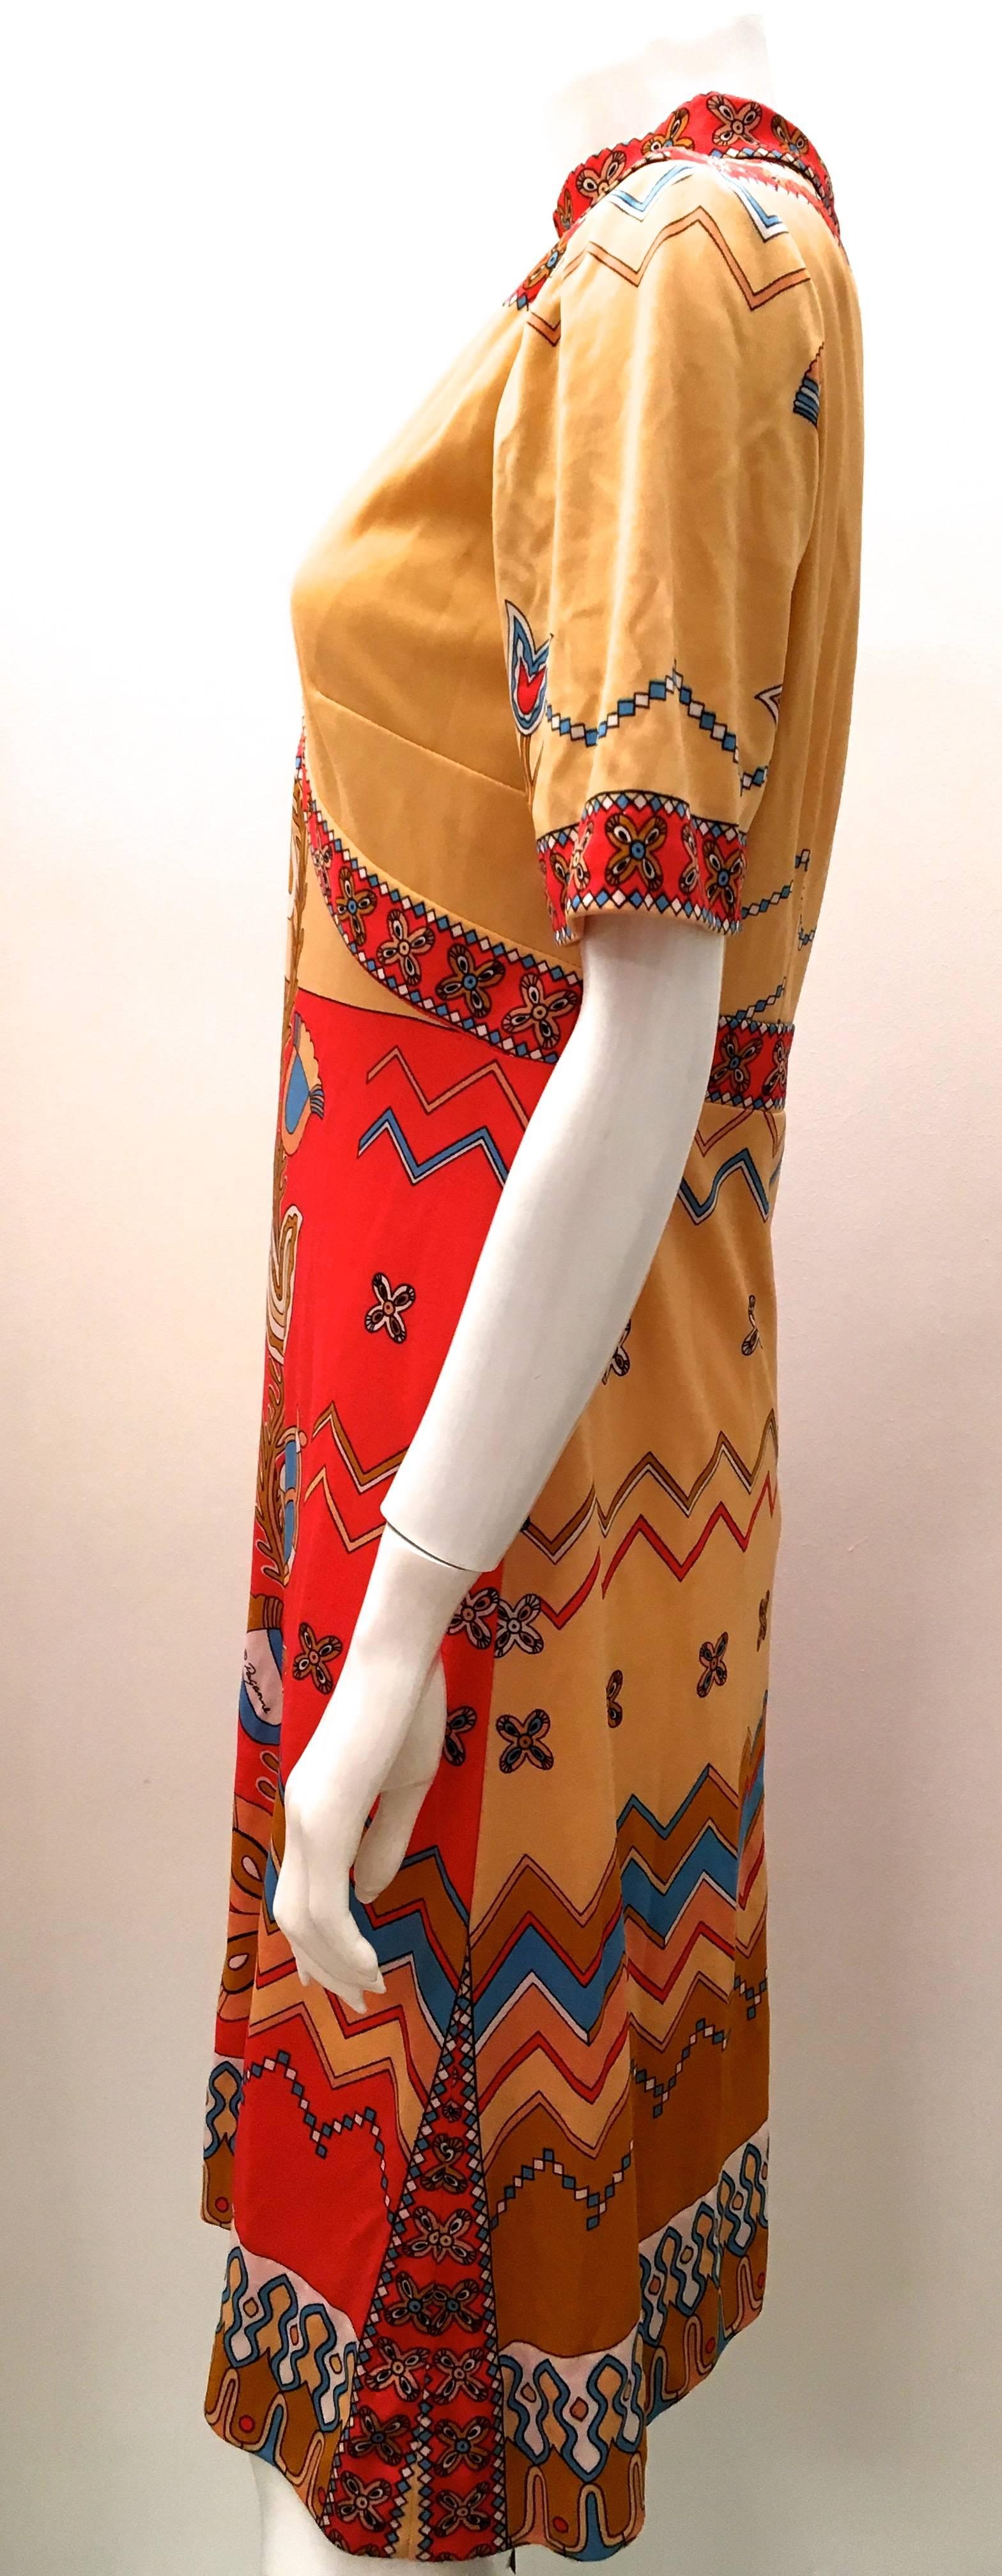 Presented here is a gorgeous Paganne day dress from the 1970's. The dress is a geometric graphic floral print comprised of shades of yellow, cream, orange, red, white and blue. There is no fabric label attached, but the fabric has some stretch like